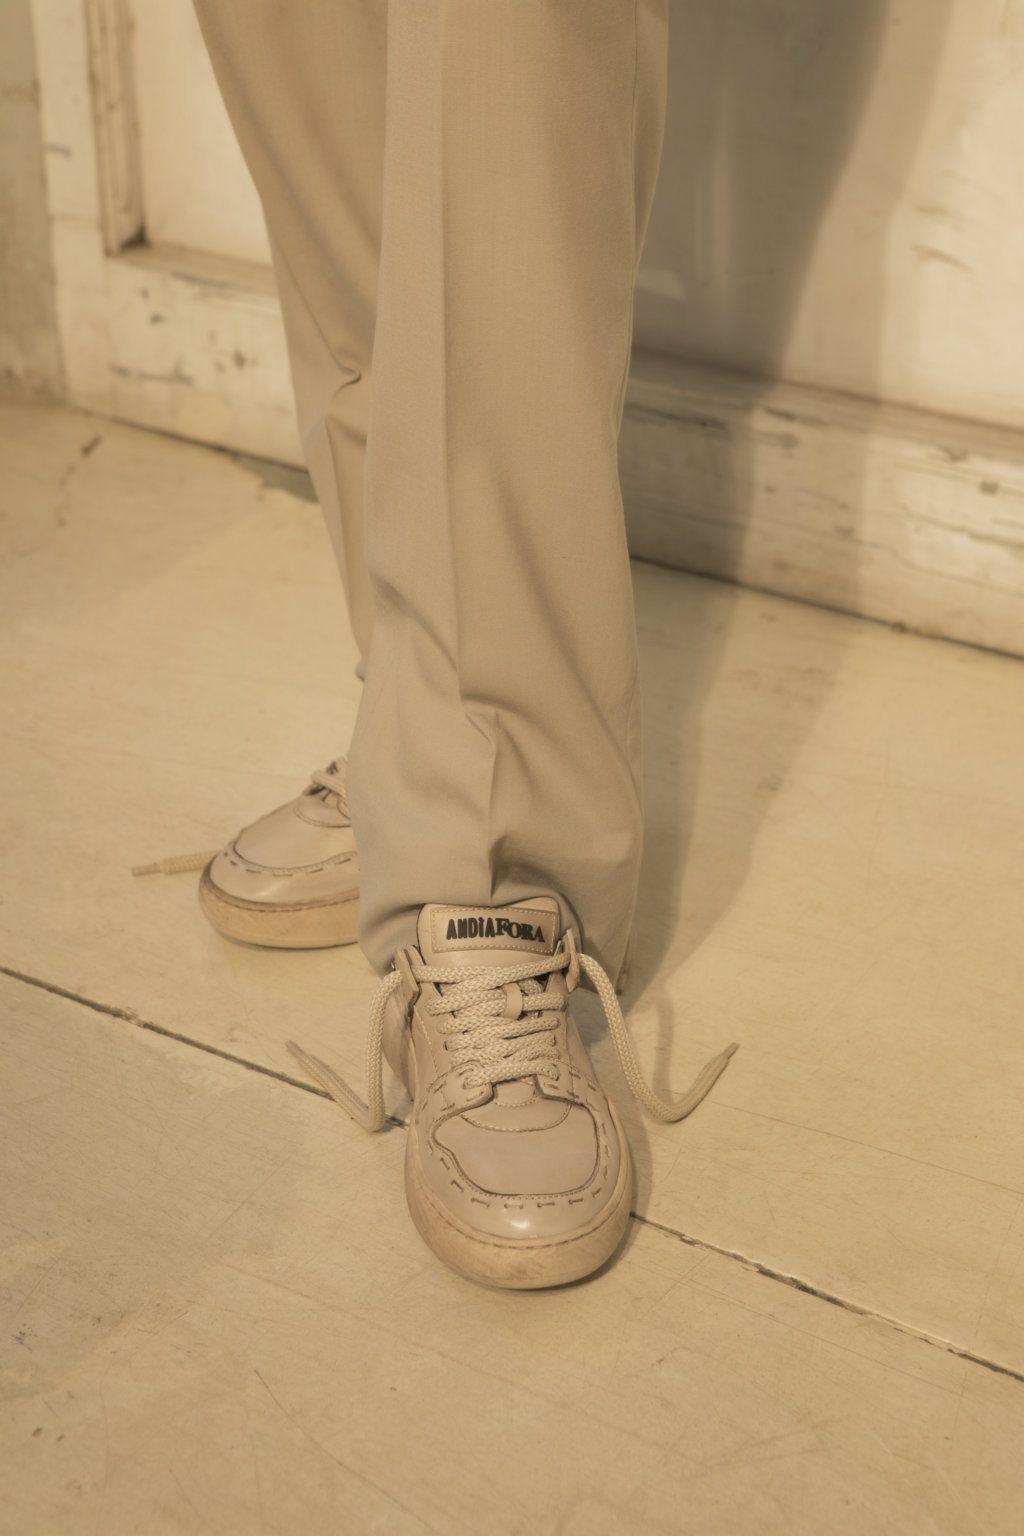 Rounded cream sneaker made in italy. High quality sneaker designed in italy by Andia Fora brand